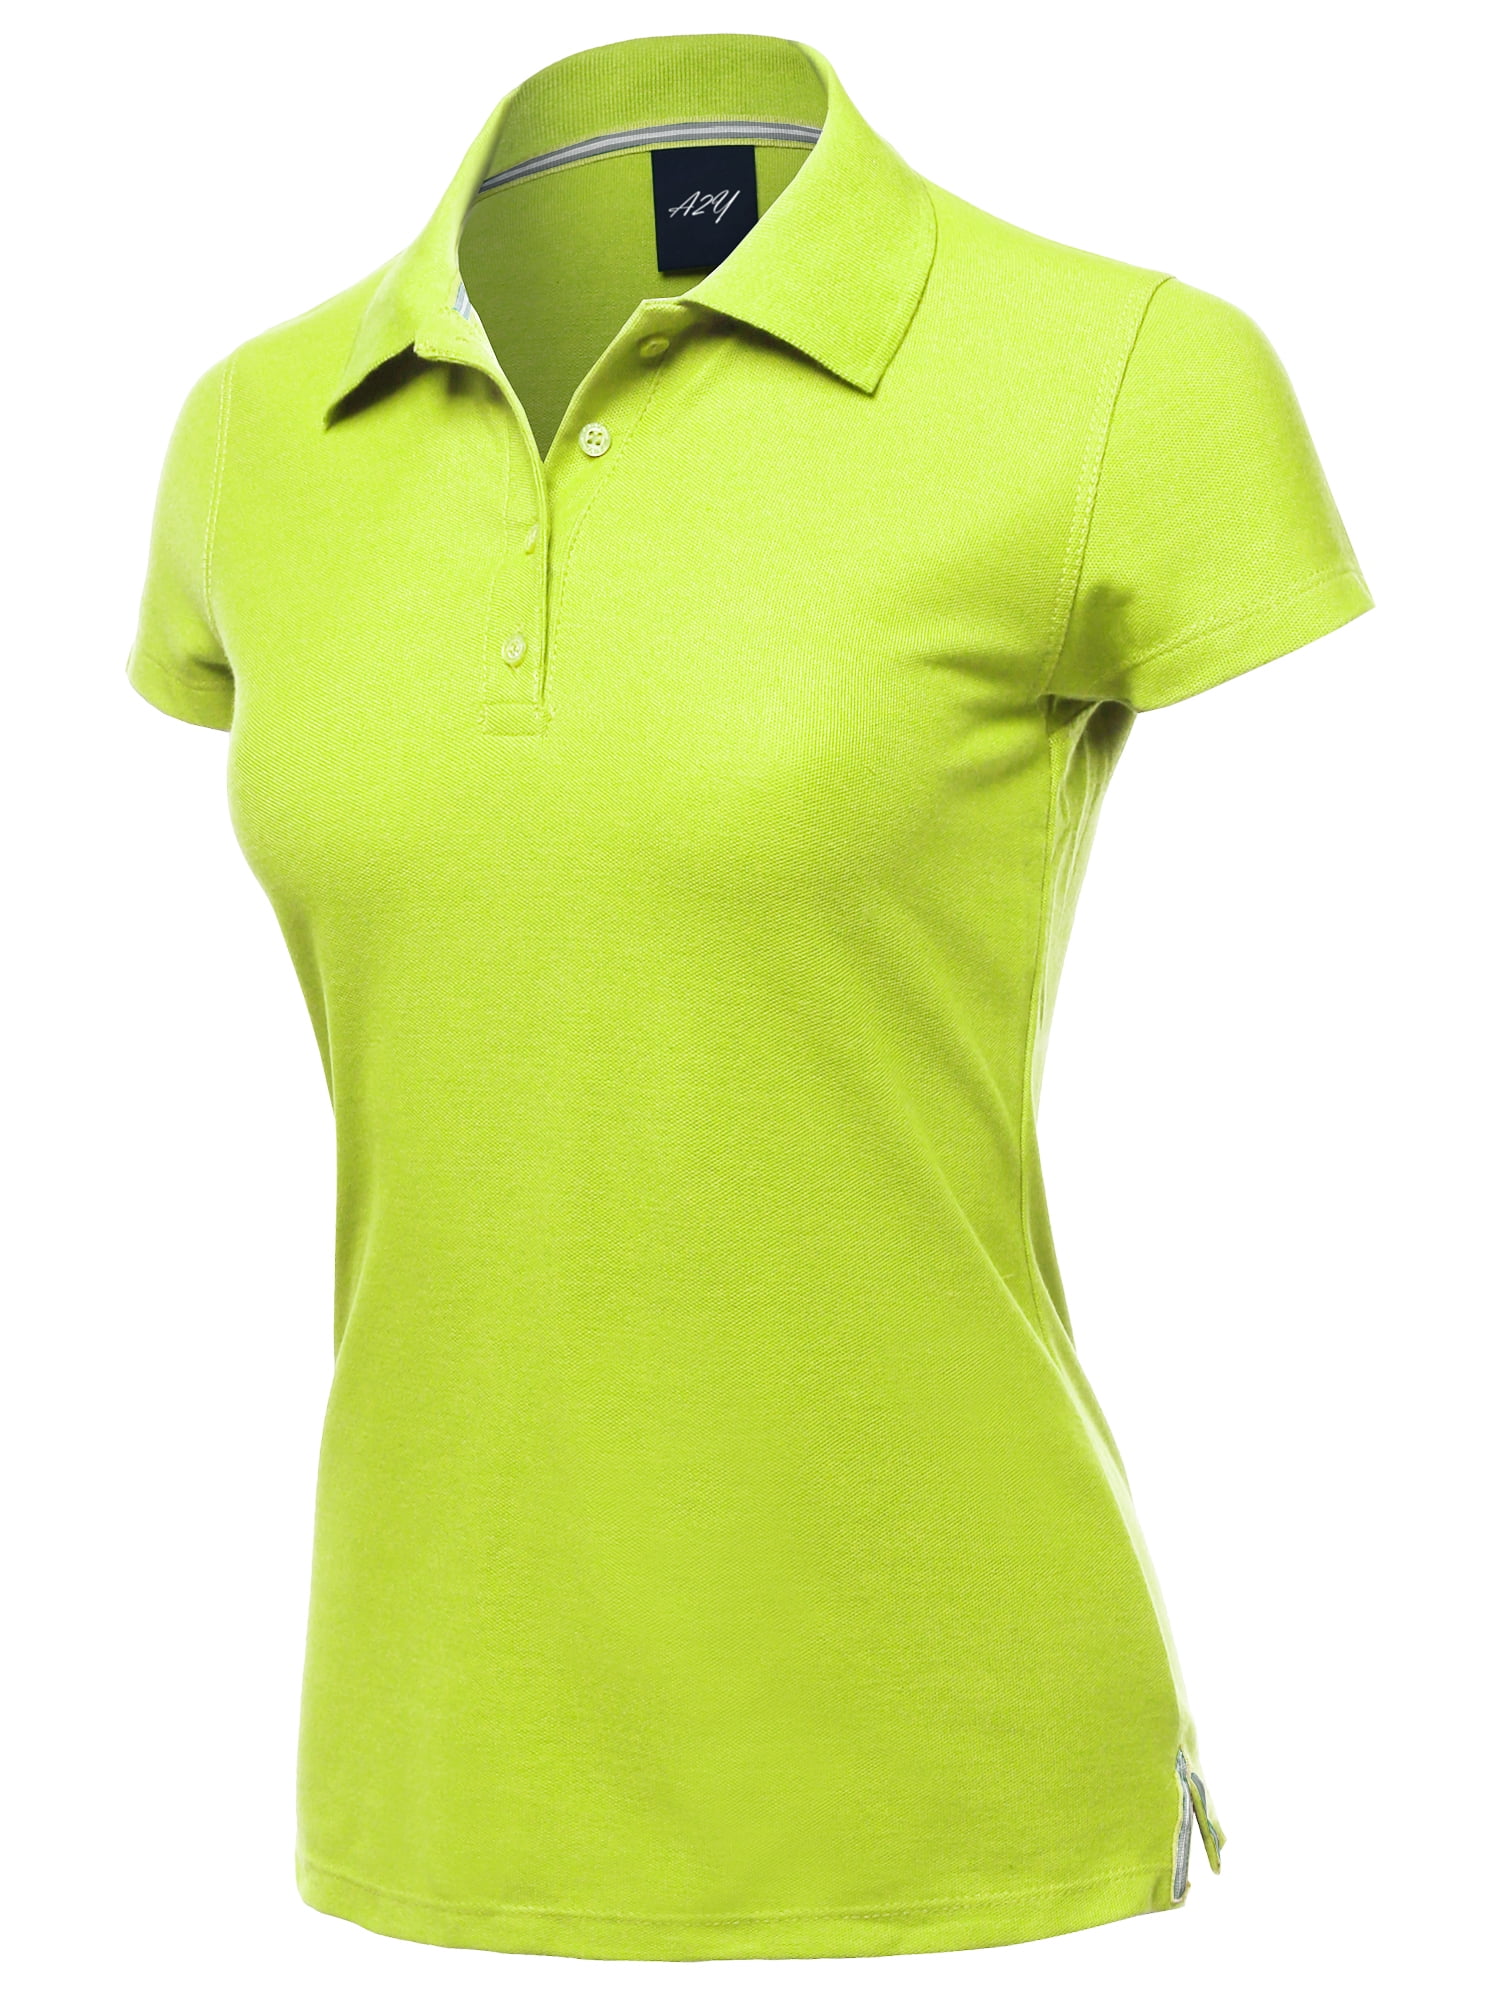 Being Casual Ribbed Cotton Knit  3 Button Johnny Collar S/S Top L Lime green 